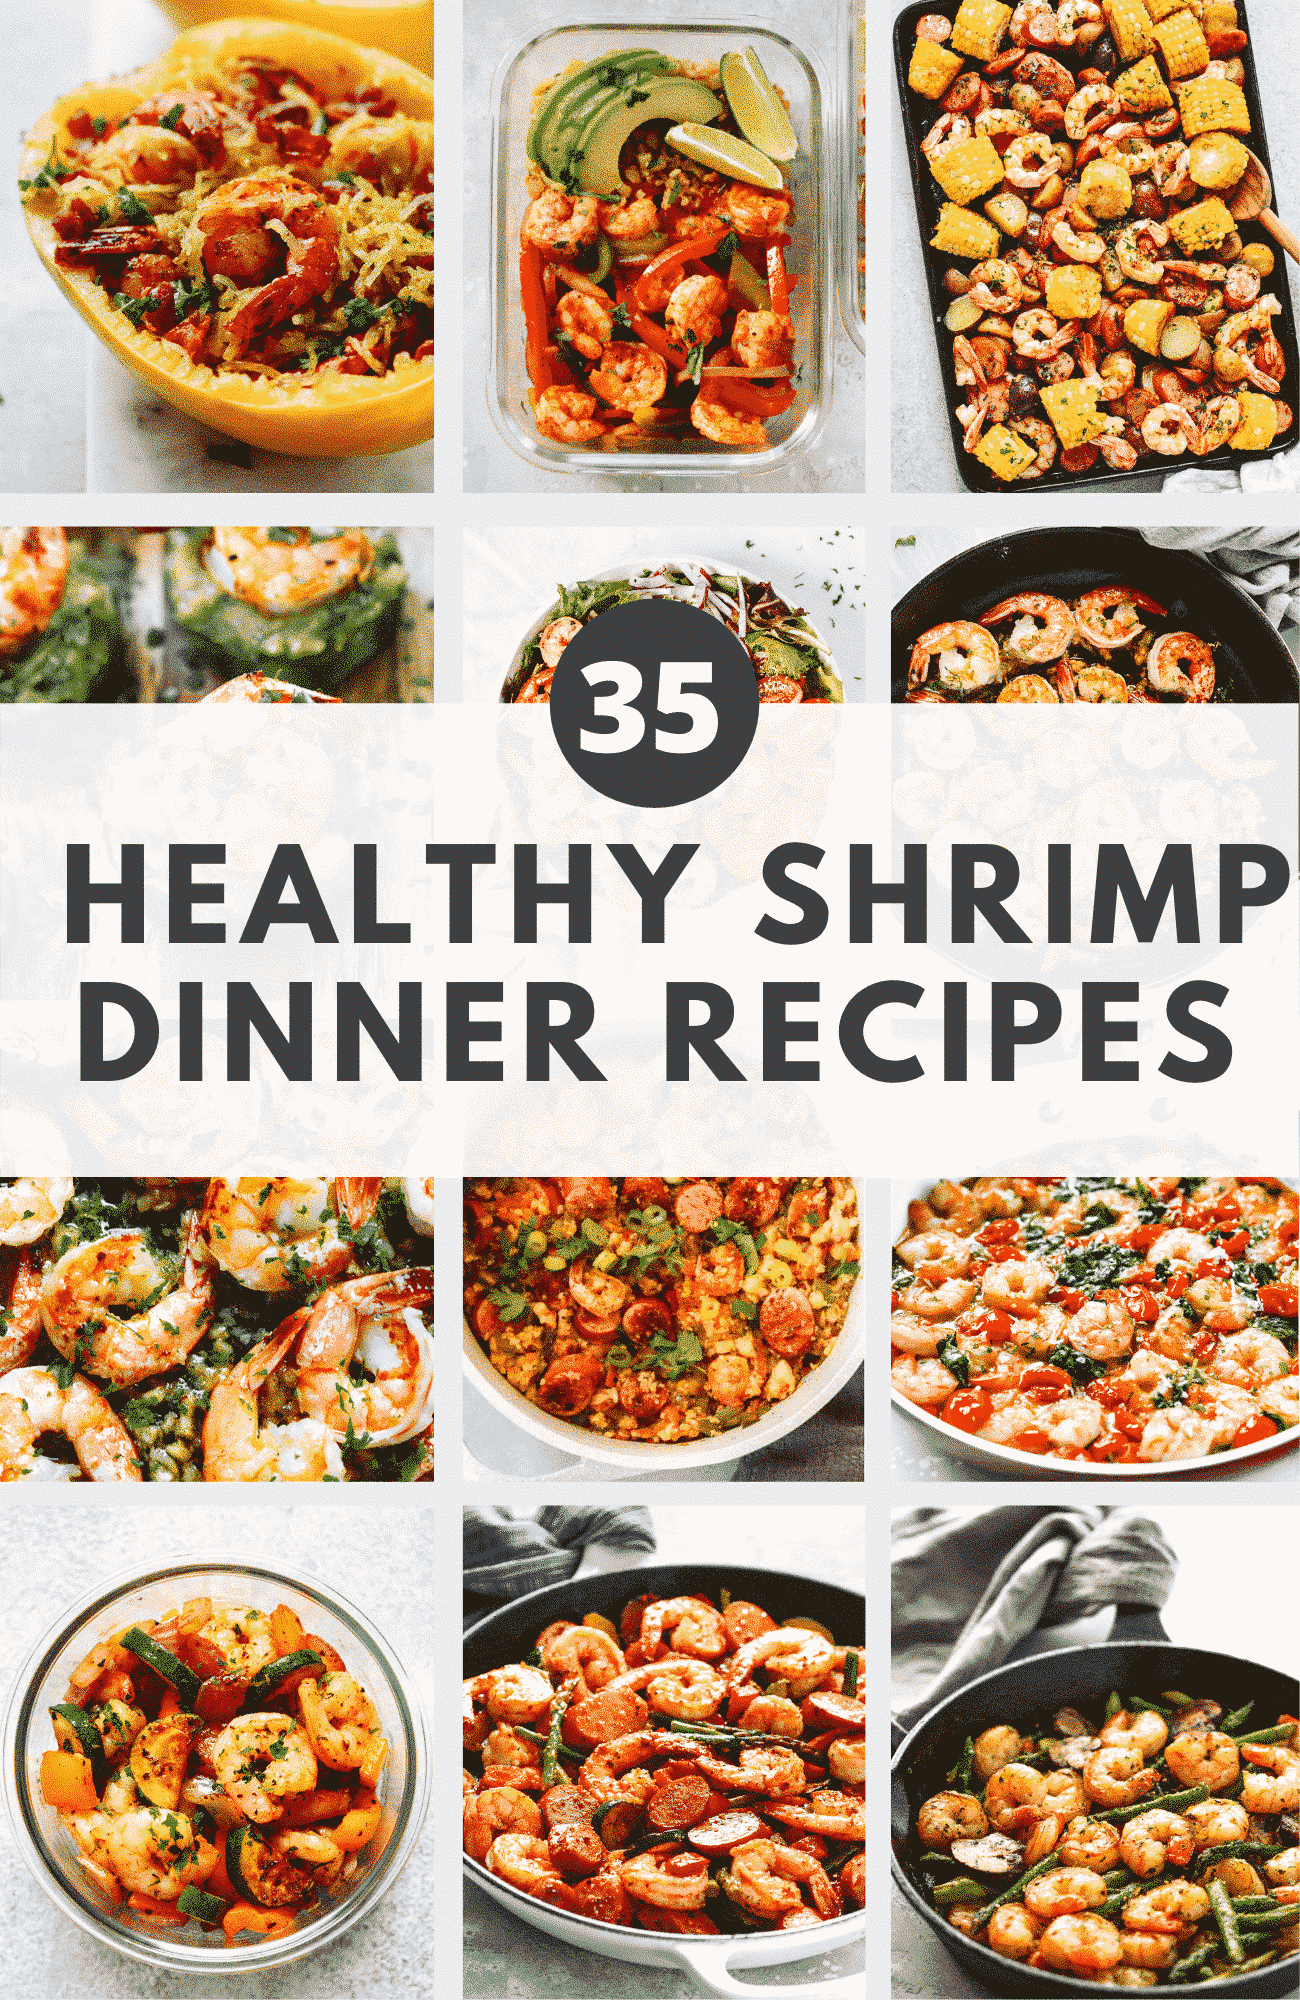 Round up image with text "35 Healthy Shrimp Dinner Recipes"